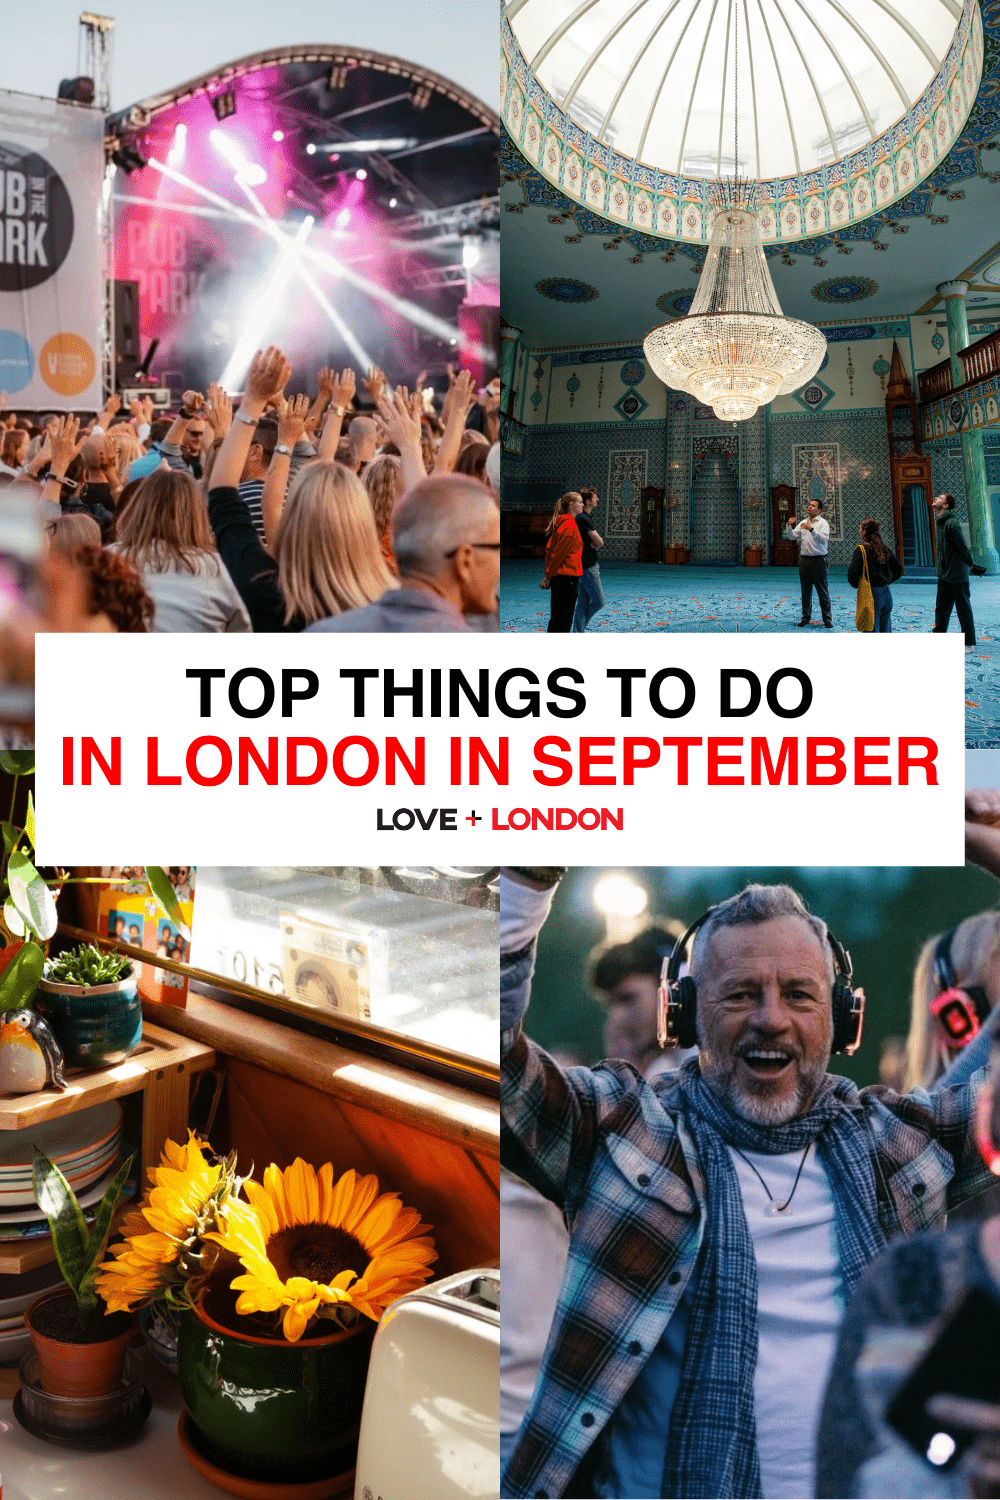 Top Things to do in London in September